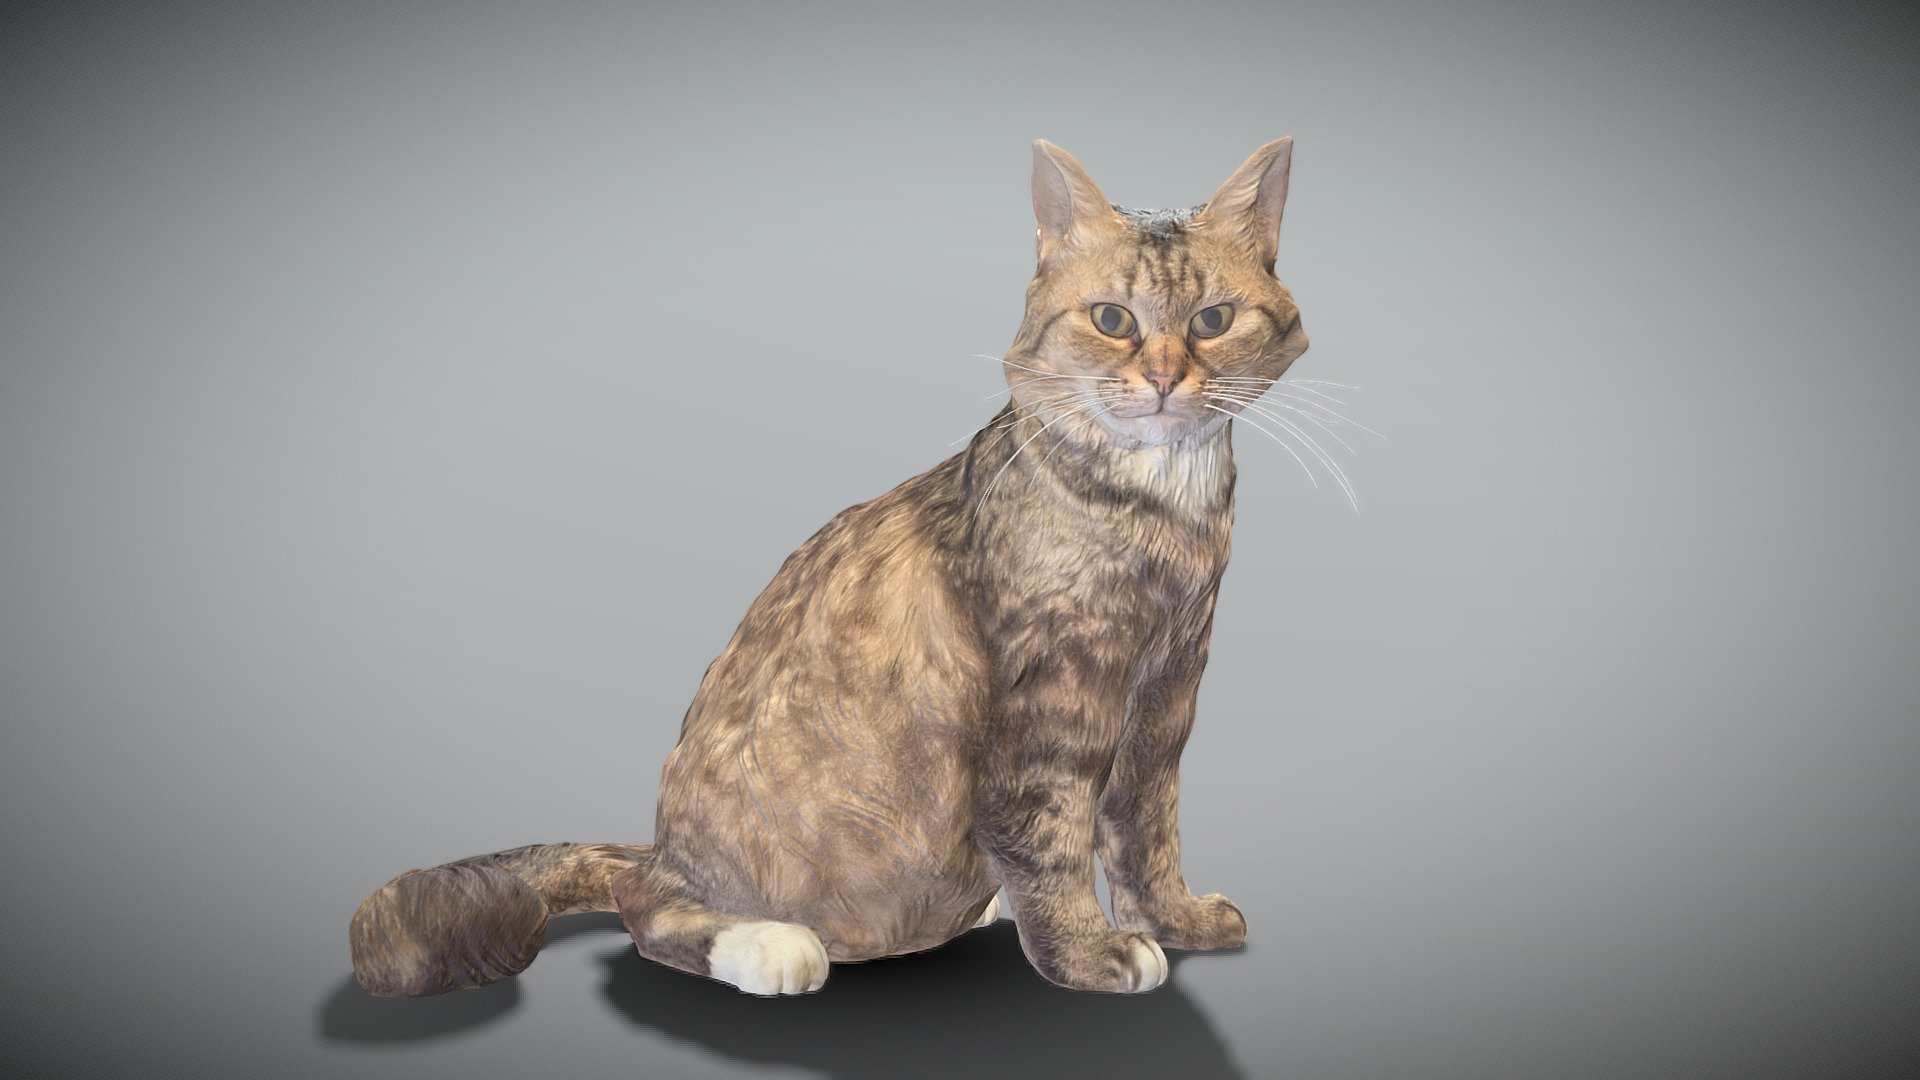 This is a true sized and highly detailed model of a young charming fluffy cat. It will add life and coziness to any architectural visualisation of houses, playgrounds, parques, urban landscapes, etc.

The product is ready both for immediate use in architectural visualisations, or further render and detailed sculpting in Zbrush.

Technical specifications:




digital double 3d scan model

150k &amp; 30k triangles | double triangulated

high-poly model (.ztl tool with 4-5 subdivisions) clean and retopologized automatically via ZRemesher

sufficiently clean

PBR textures 8K resolution: Diffuse, Normal, Specular maps

non-overlapping UV map

no extra plugins are required for this model

Download package includes a Cinema 4D project file with Redshift shader, OBJ, FBX, STL files, which are applicable for 3ds Max, Maya, Unreal Engine, Unity, Blender, etc. All the textures you will find in the “Tex” folder, included into the main archive.

3D EVERYTHING

Stand with Ukraine! - Fluffy cat 28 - Buy Royalty Free 3D model by deep3dstudio 3d model